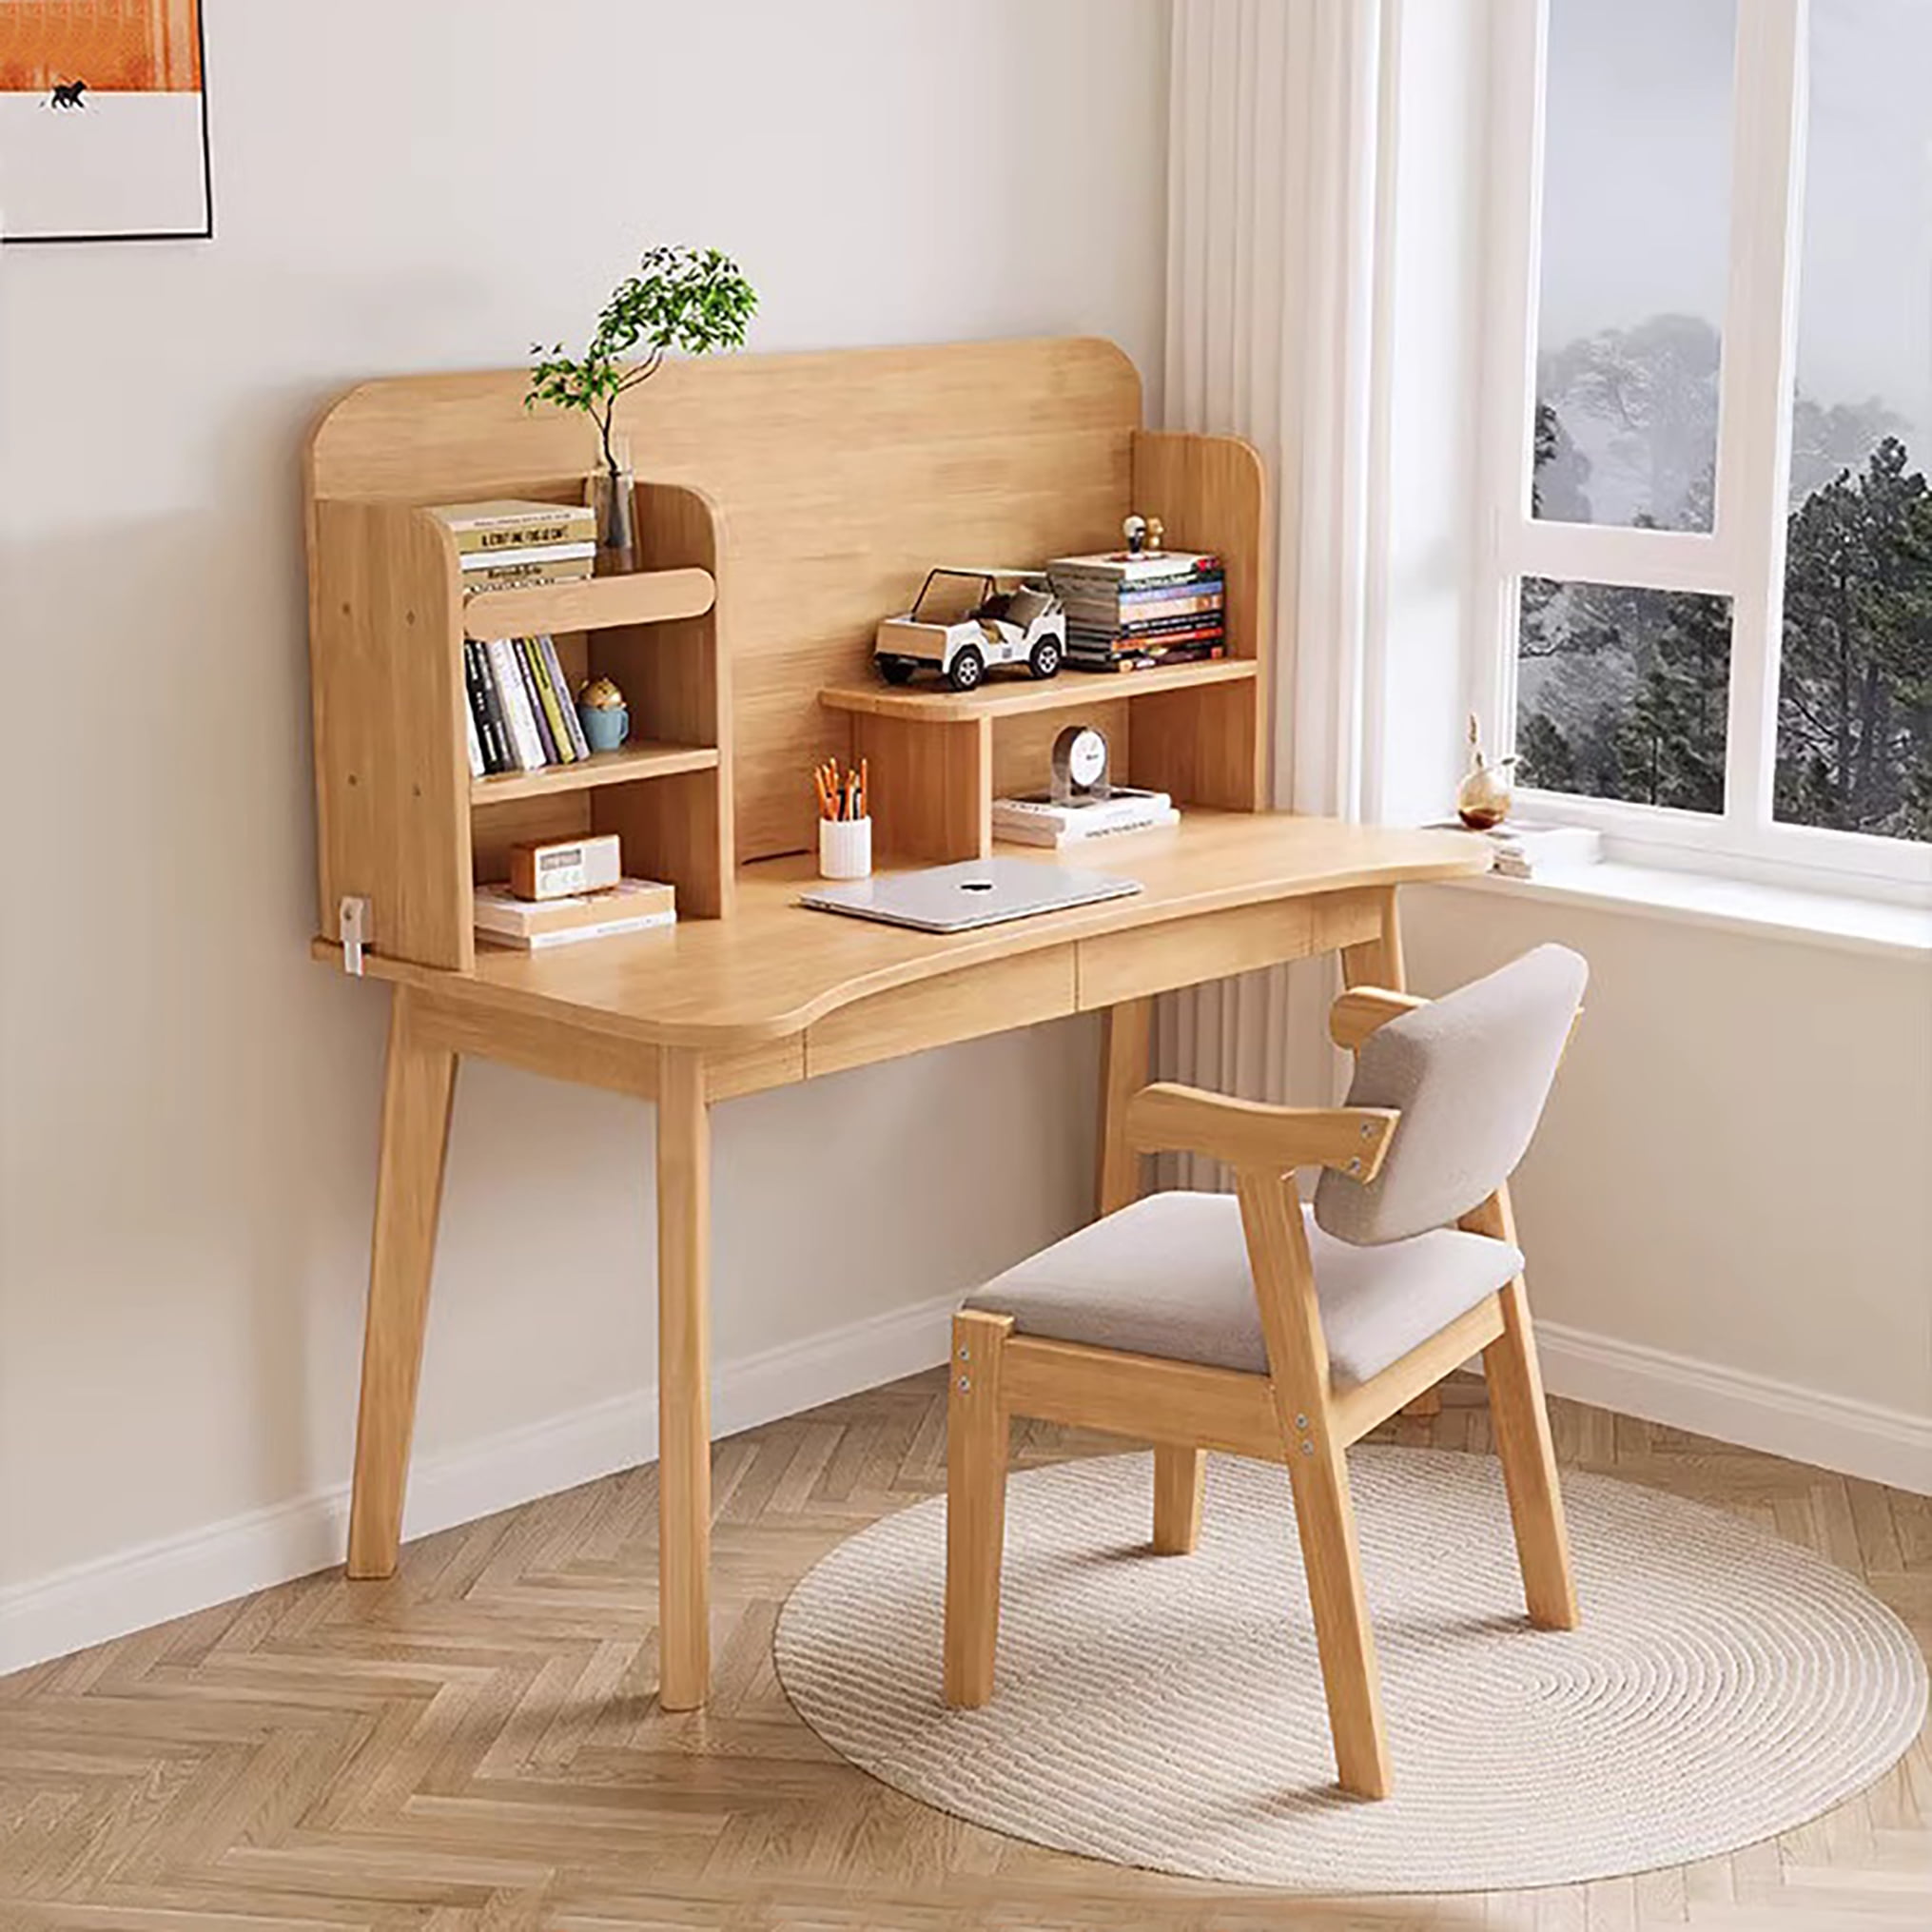 BALANBO Kids Desk and Chair Set Kids Table Wooden Children’s Study Desk  with Bookshelf and Two Drawers and Chairs Desk for 3 Years Old and  Student's